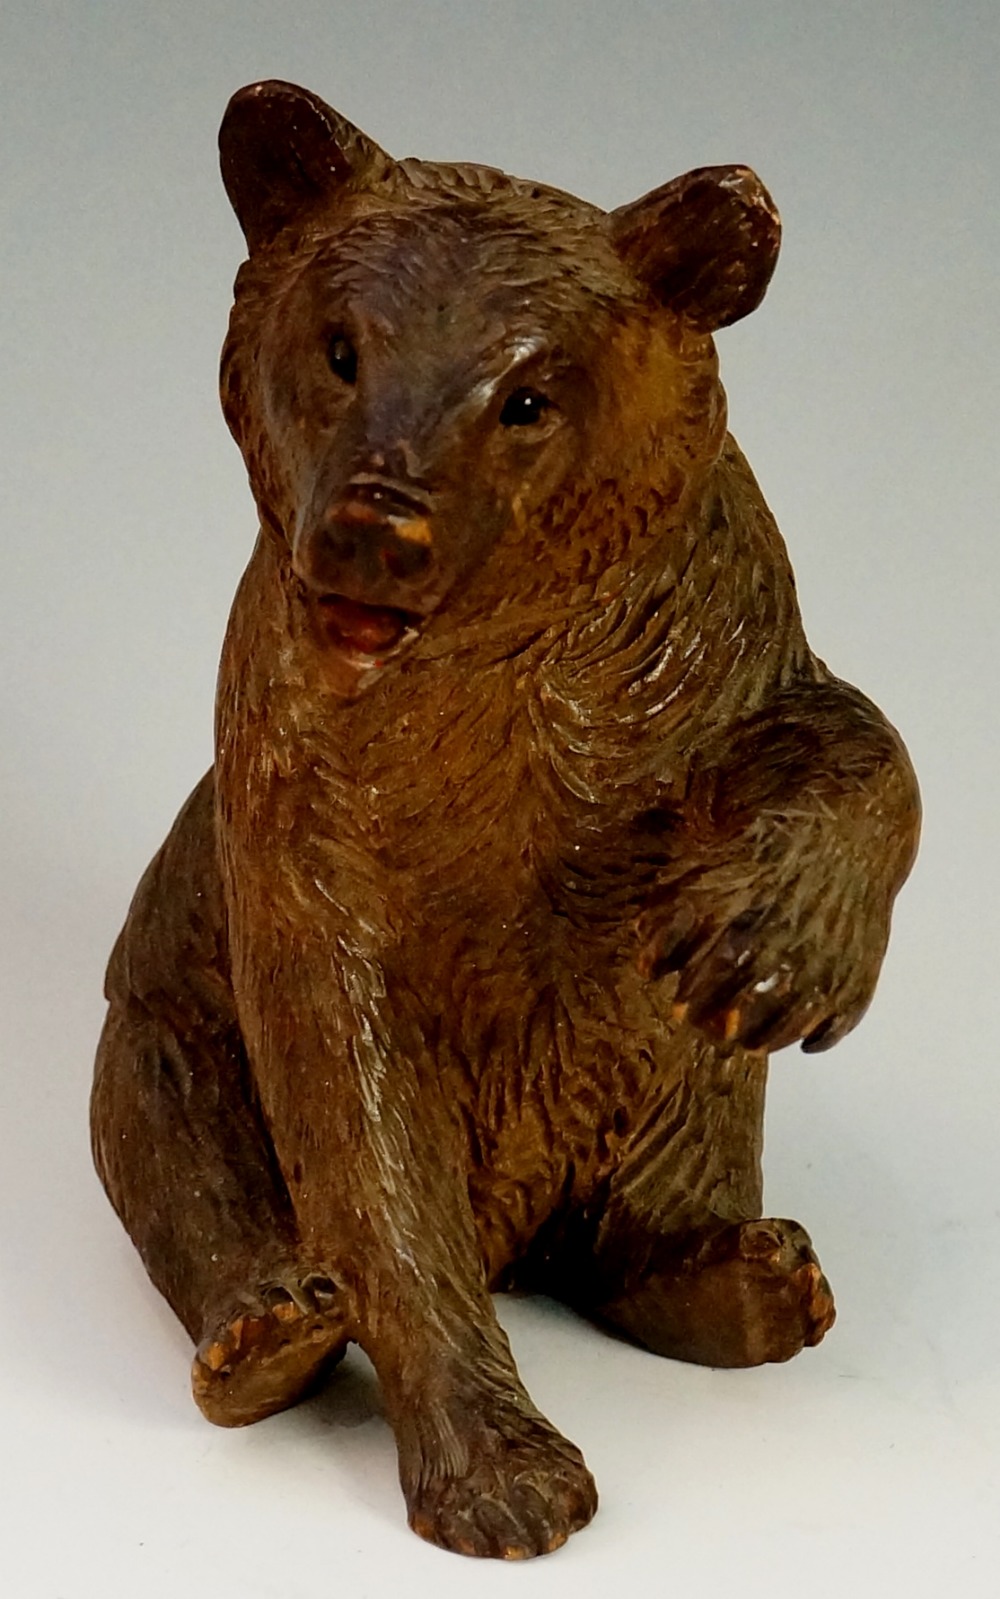 A seated bear its left paw outstretched, glass eyes and open mouth, 15cm high,